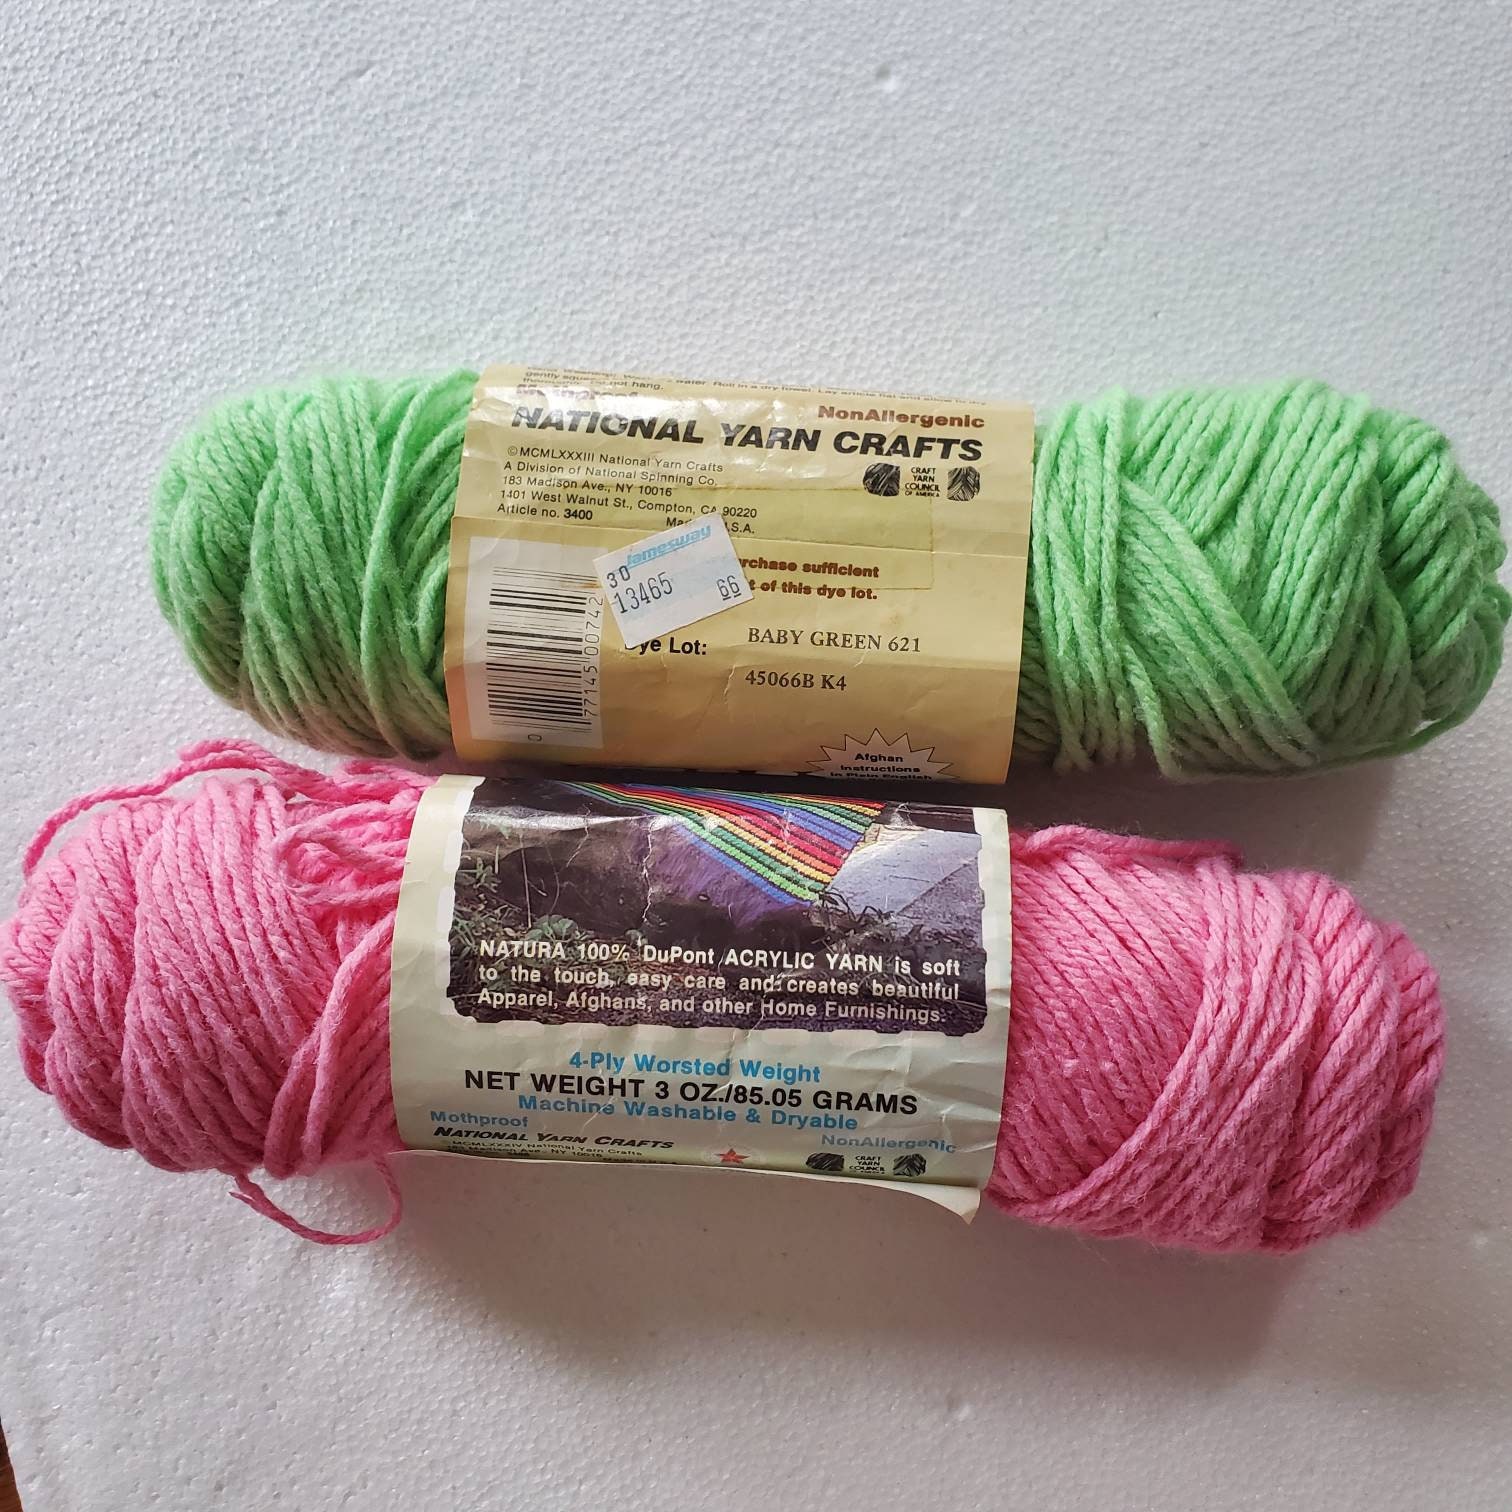 I love this yarn in soft pink